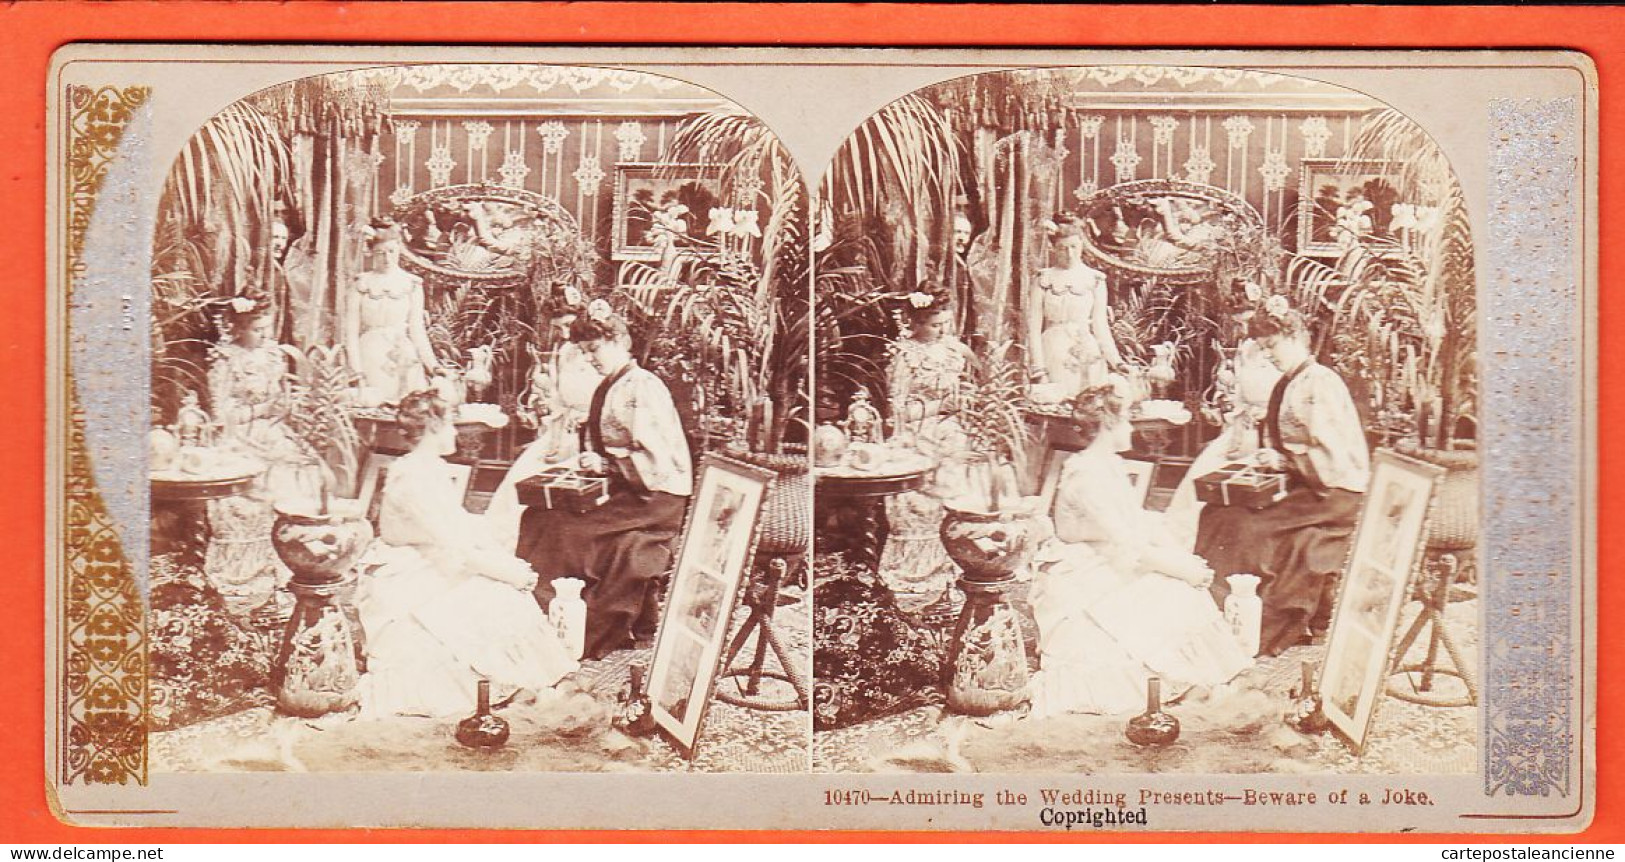 04569 / Admiring The Wedding Presents Beware Of A Joke 1- Mefiez Vous Cadeaux Mariage Blague 1890s Stereo-Views  N°10470 - Stereoscopic